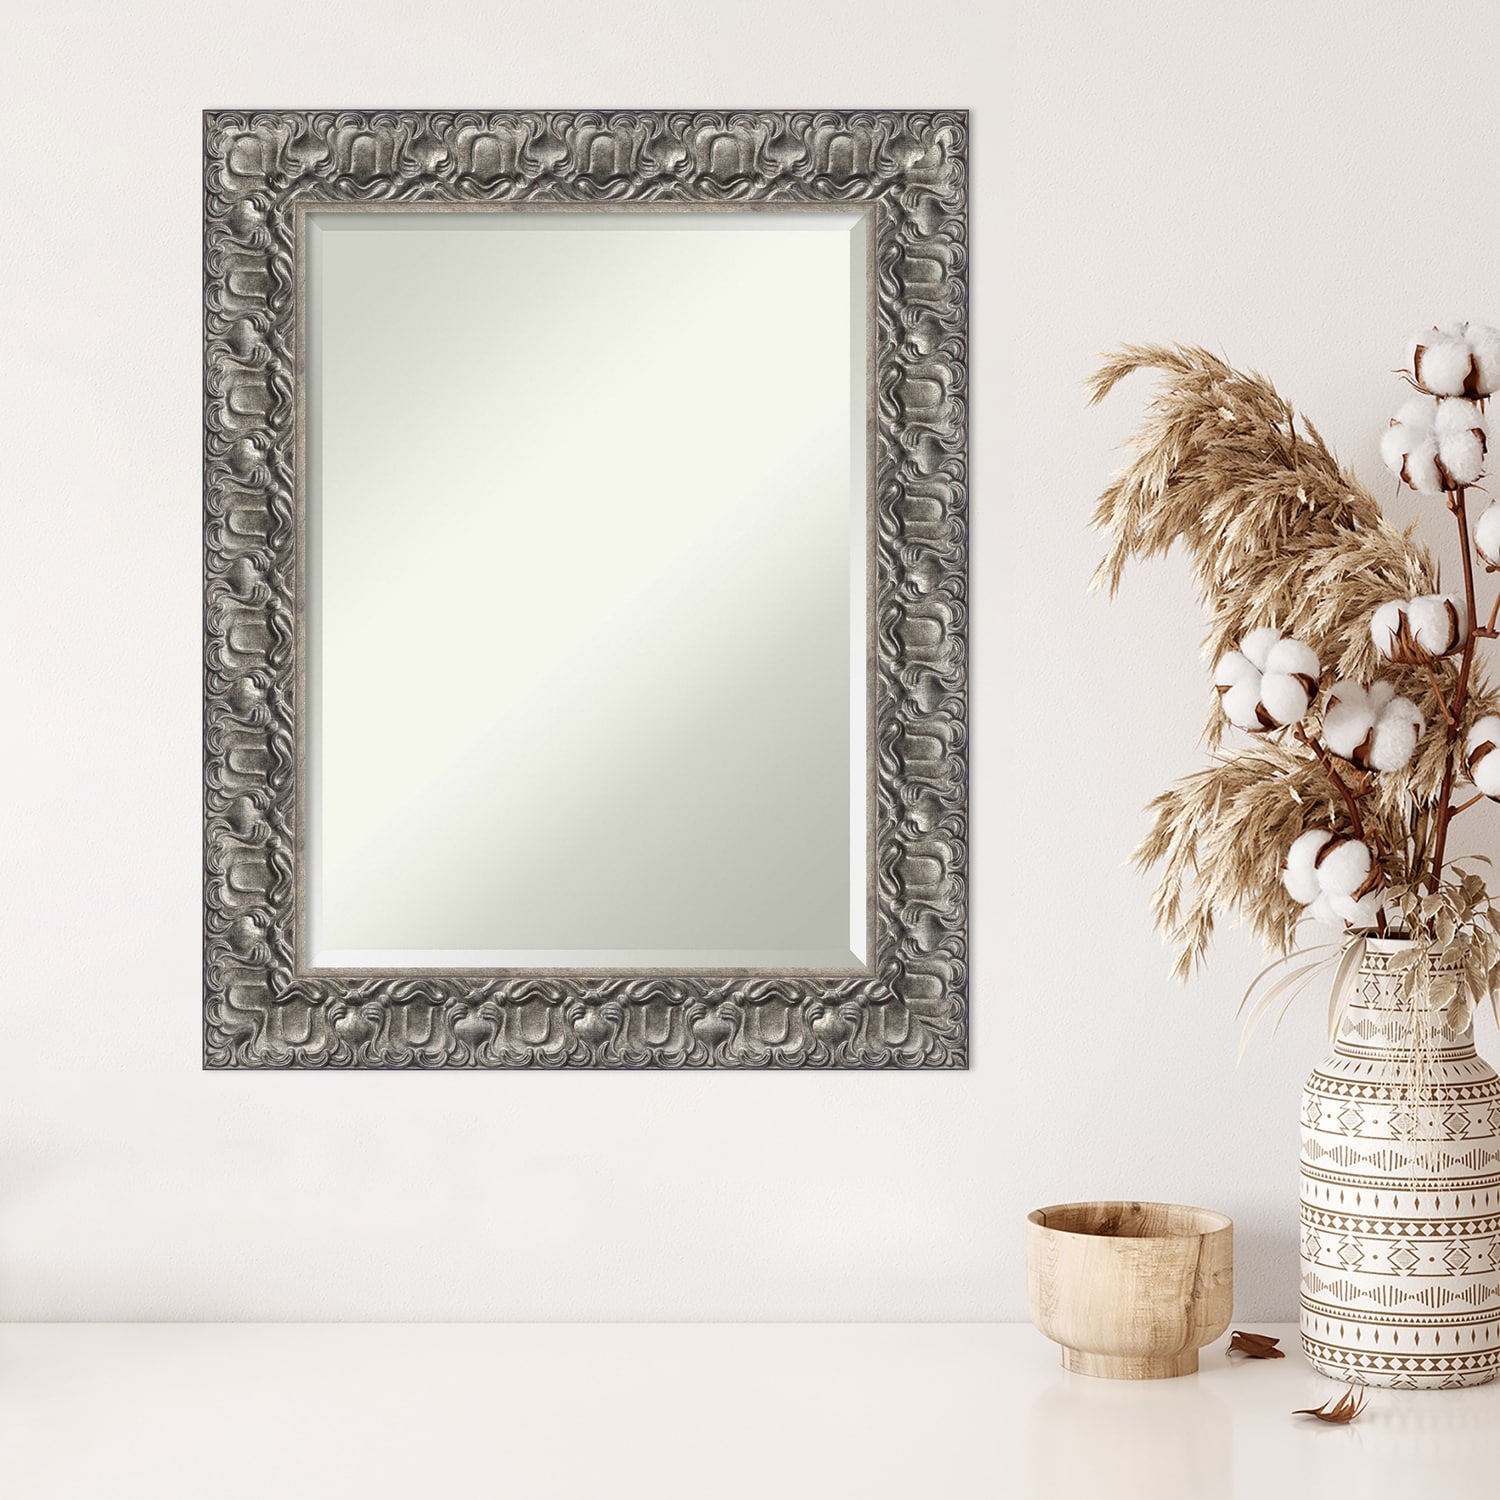 Beveled Wood Wall Mirror Silver Luxor Frame On Sale Bed Bath  Beyond  10410071